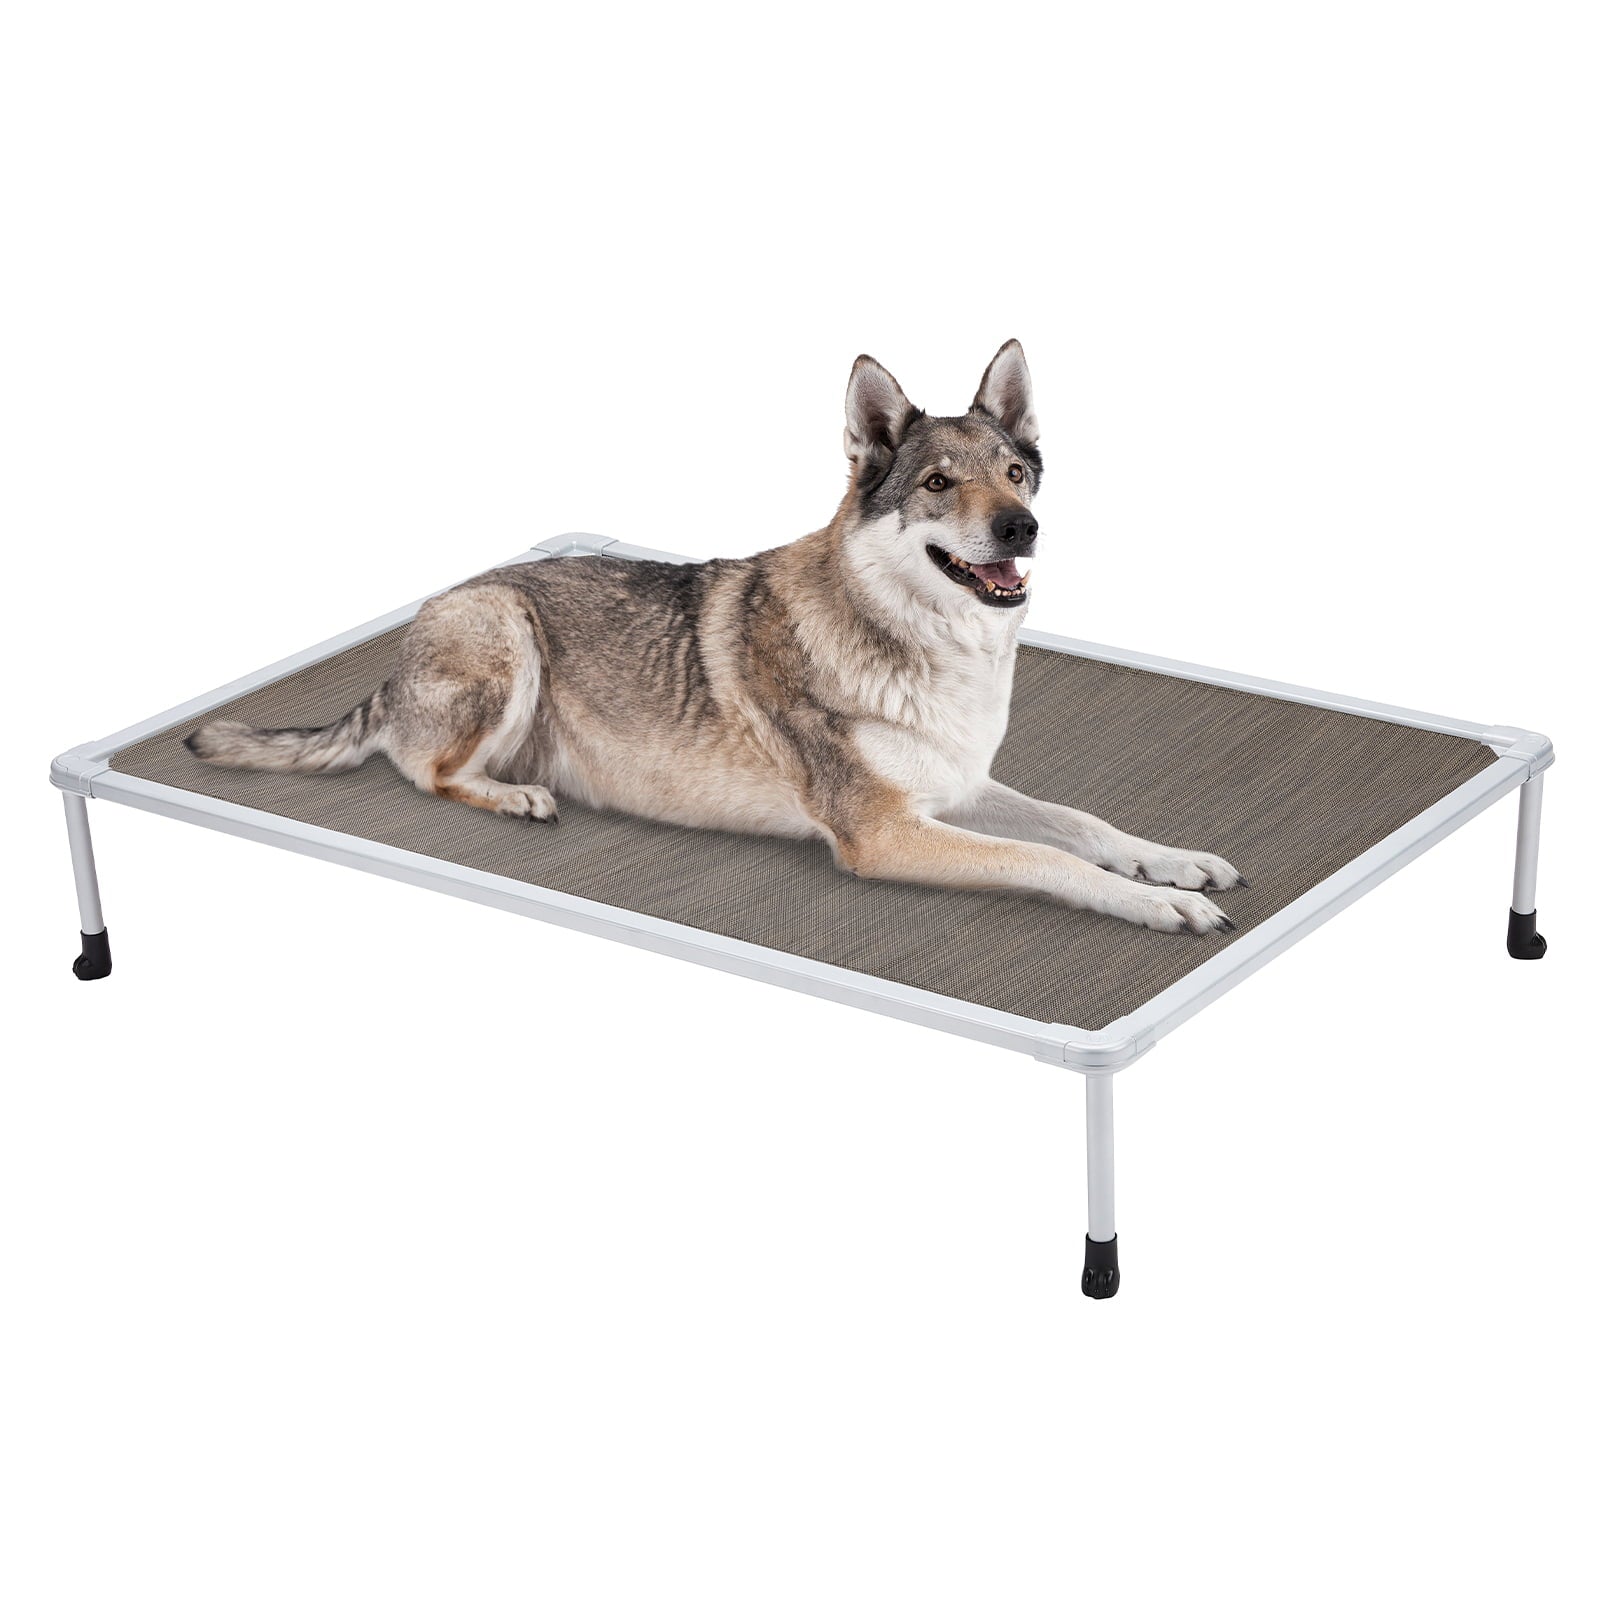 Veehoo Chewproof Dog Bed， Cooling Raised Dog Cots with Silver Metal Frame， X Large， Brown